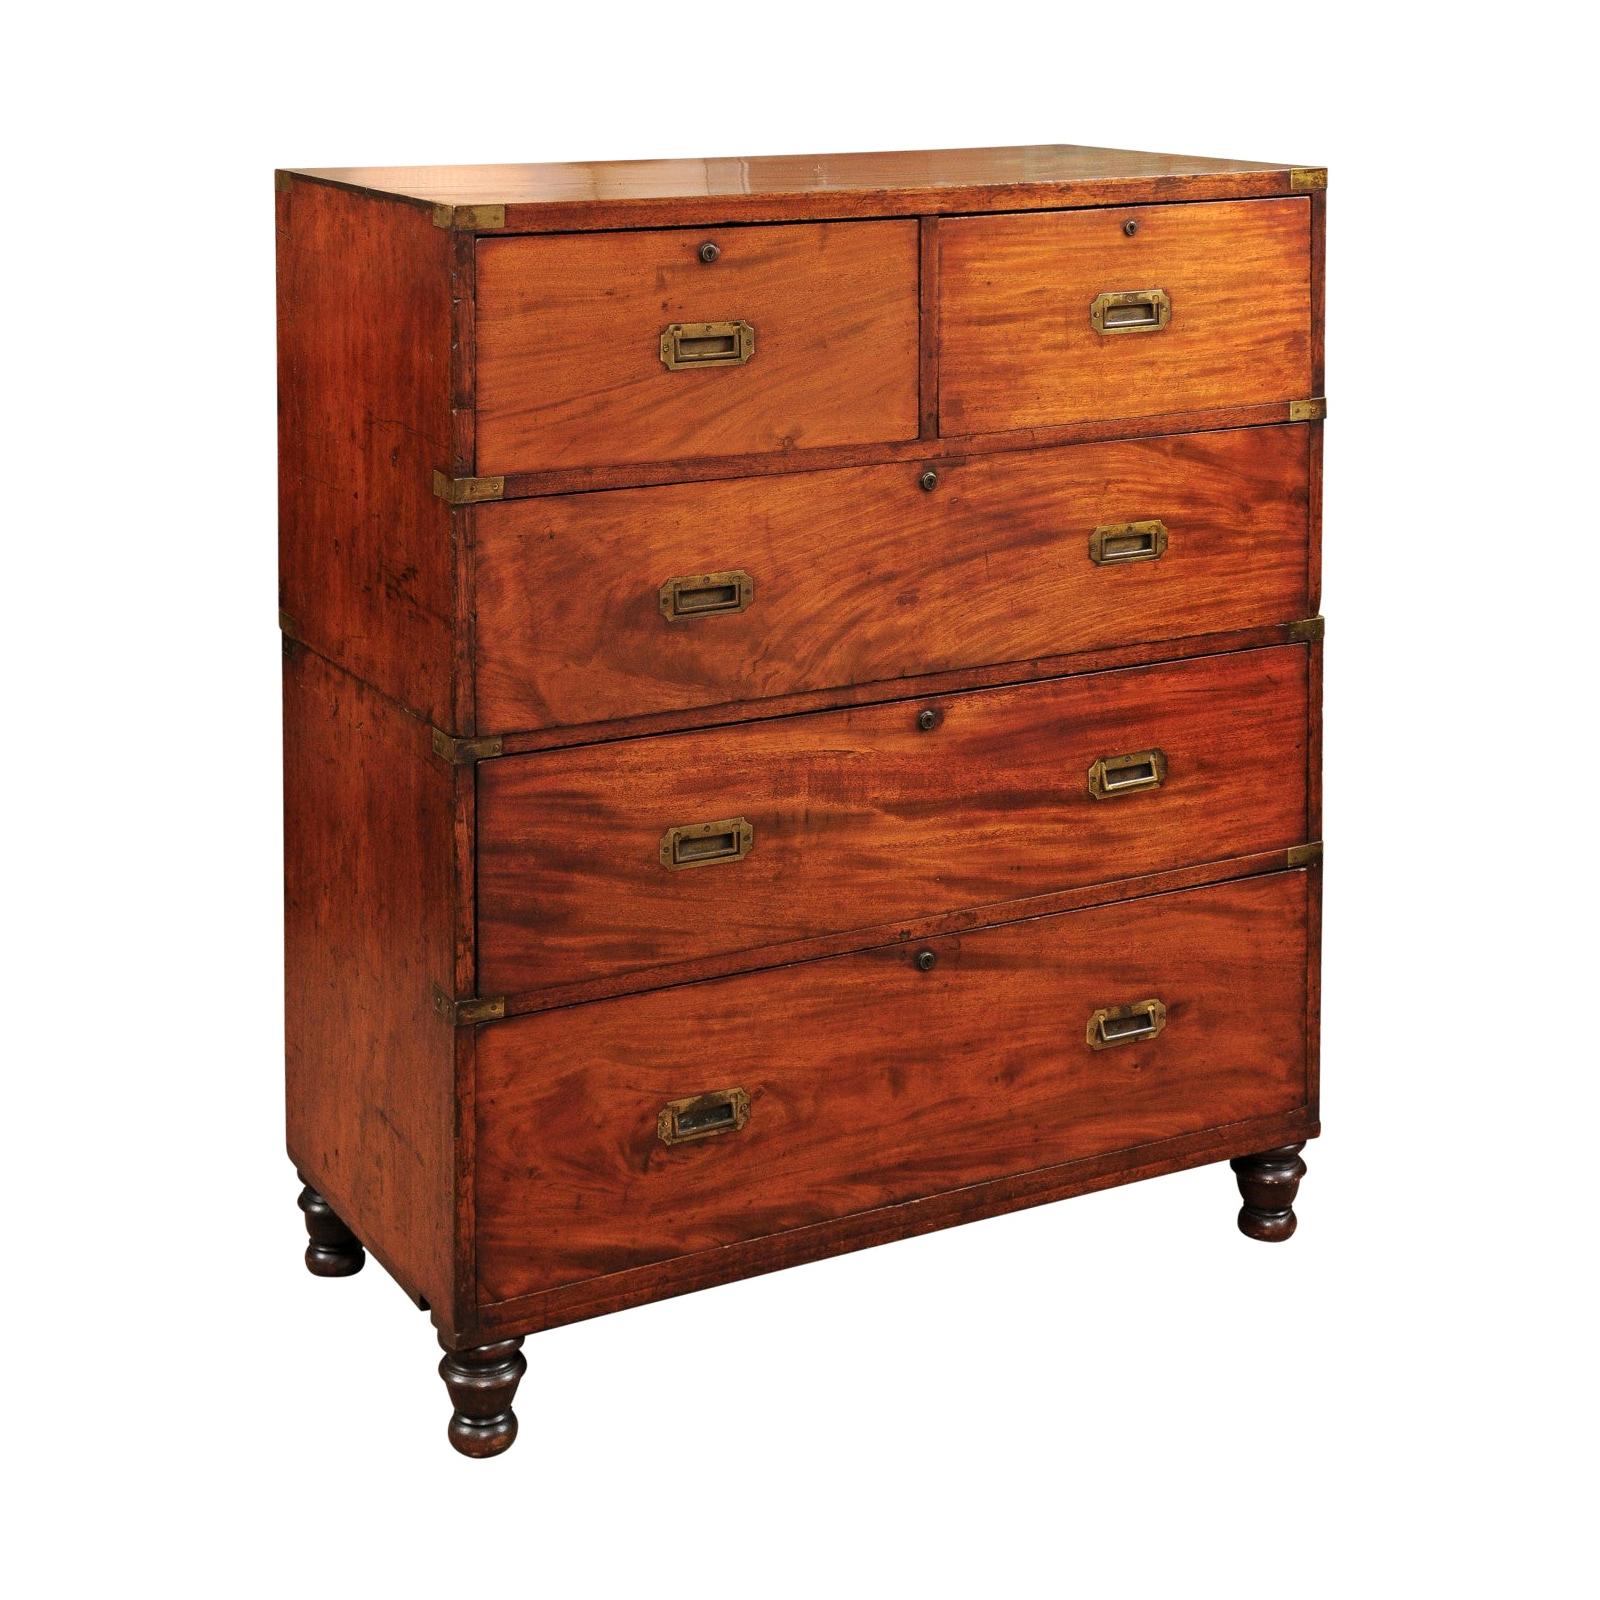 English Camphor Wood Campaign Chest, Mid-19th Century